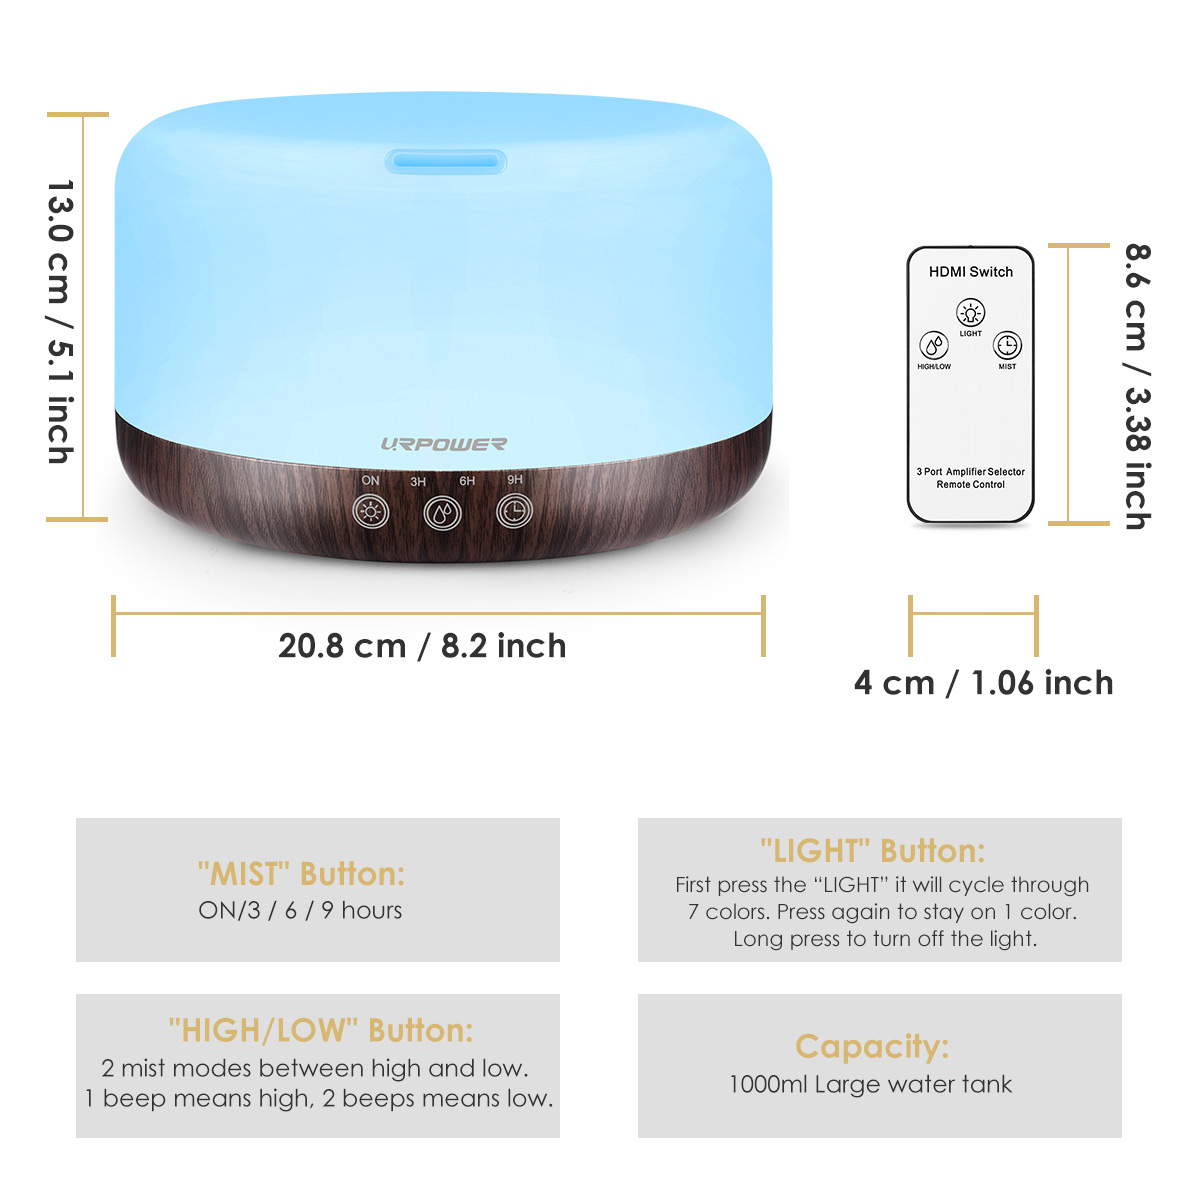 URPOWER 1000ml Essential Oil Diffuser Remote Control 5 in 1 Ultrasonic Aromatherapy Oil Cool Mist Humidifier Running 20 Hours with Adjustable Mist Mode/4 Timer Settings for Large Room Study Yoga Spa